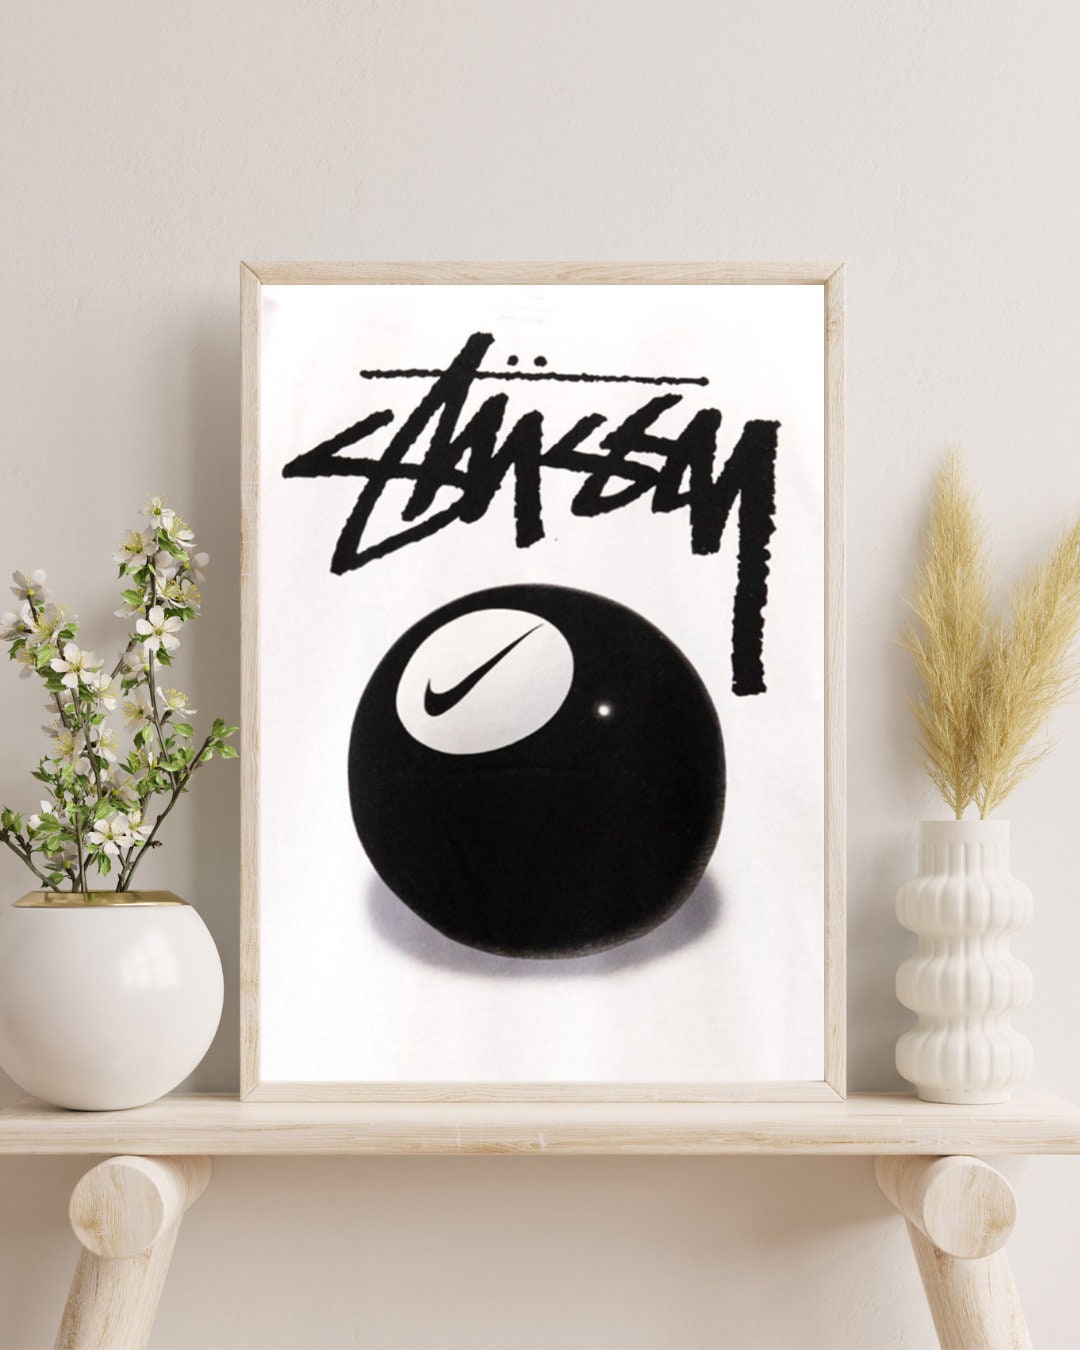 Retroflex - Stay afloat the reality boat. 1990s Stussy ad poster